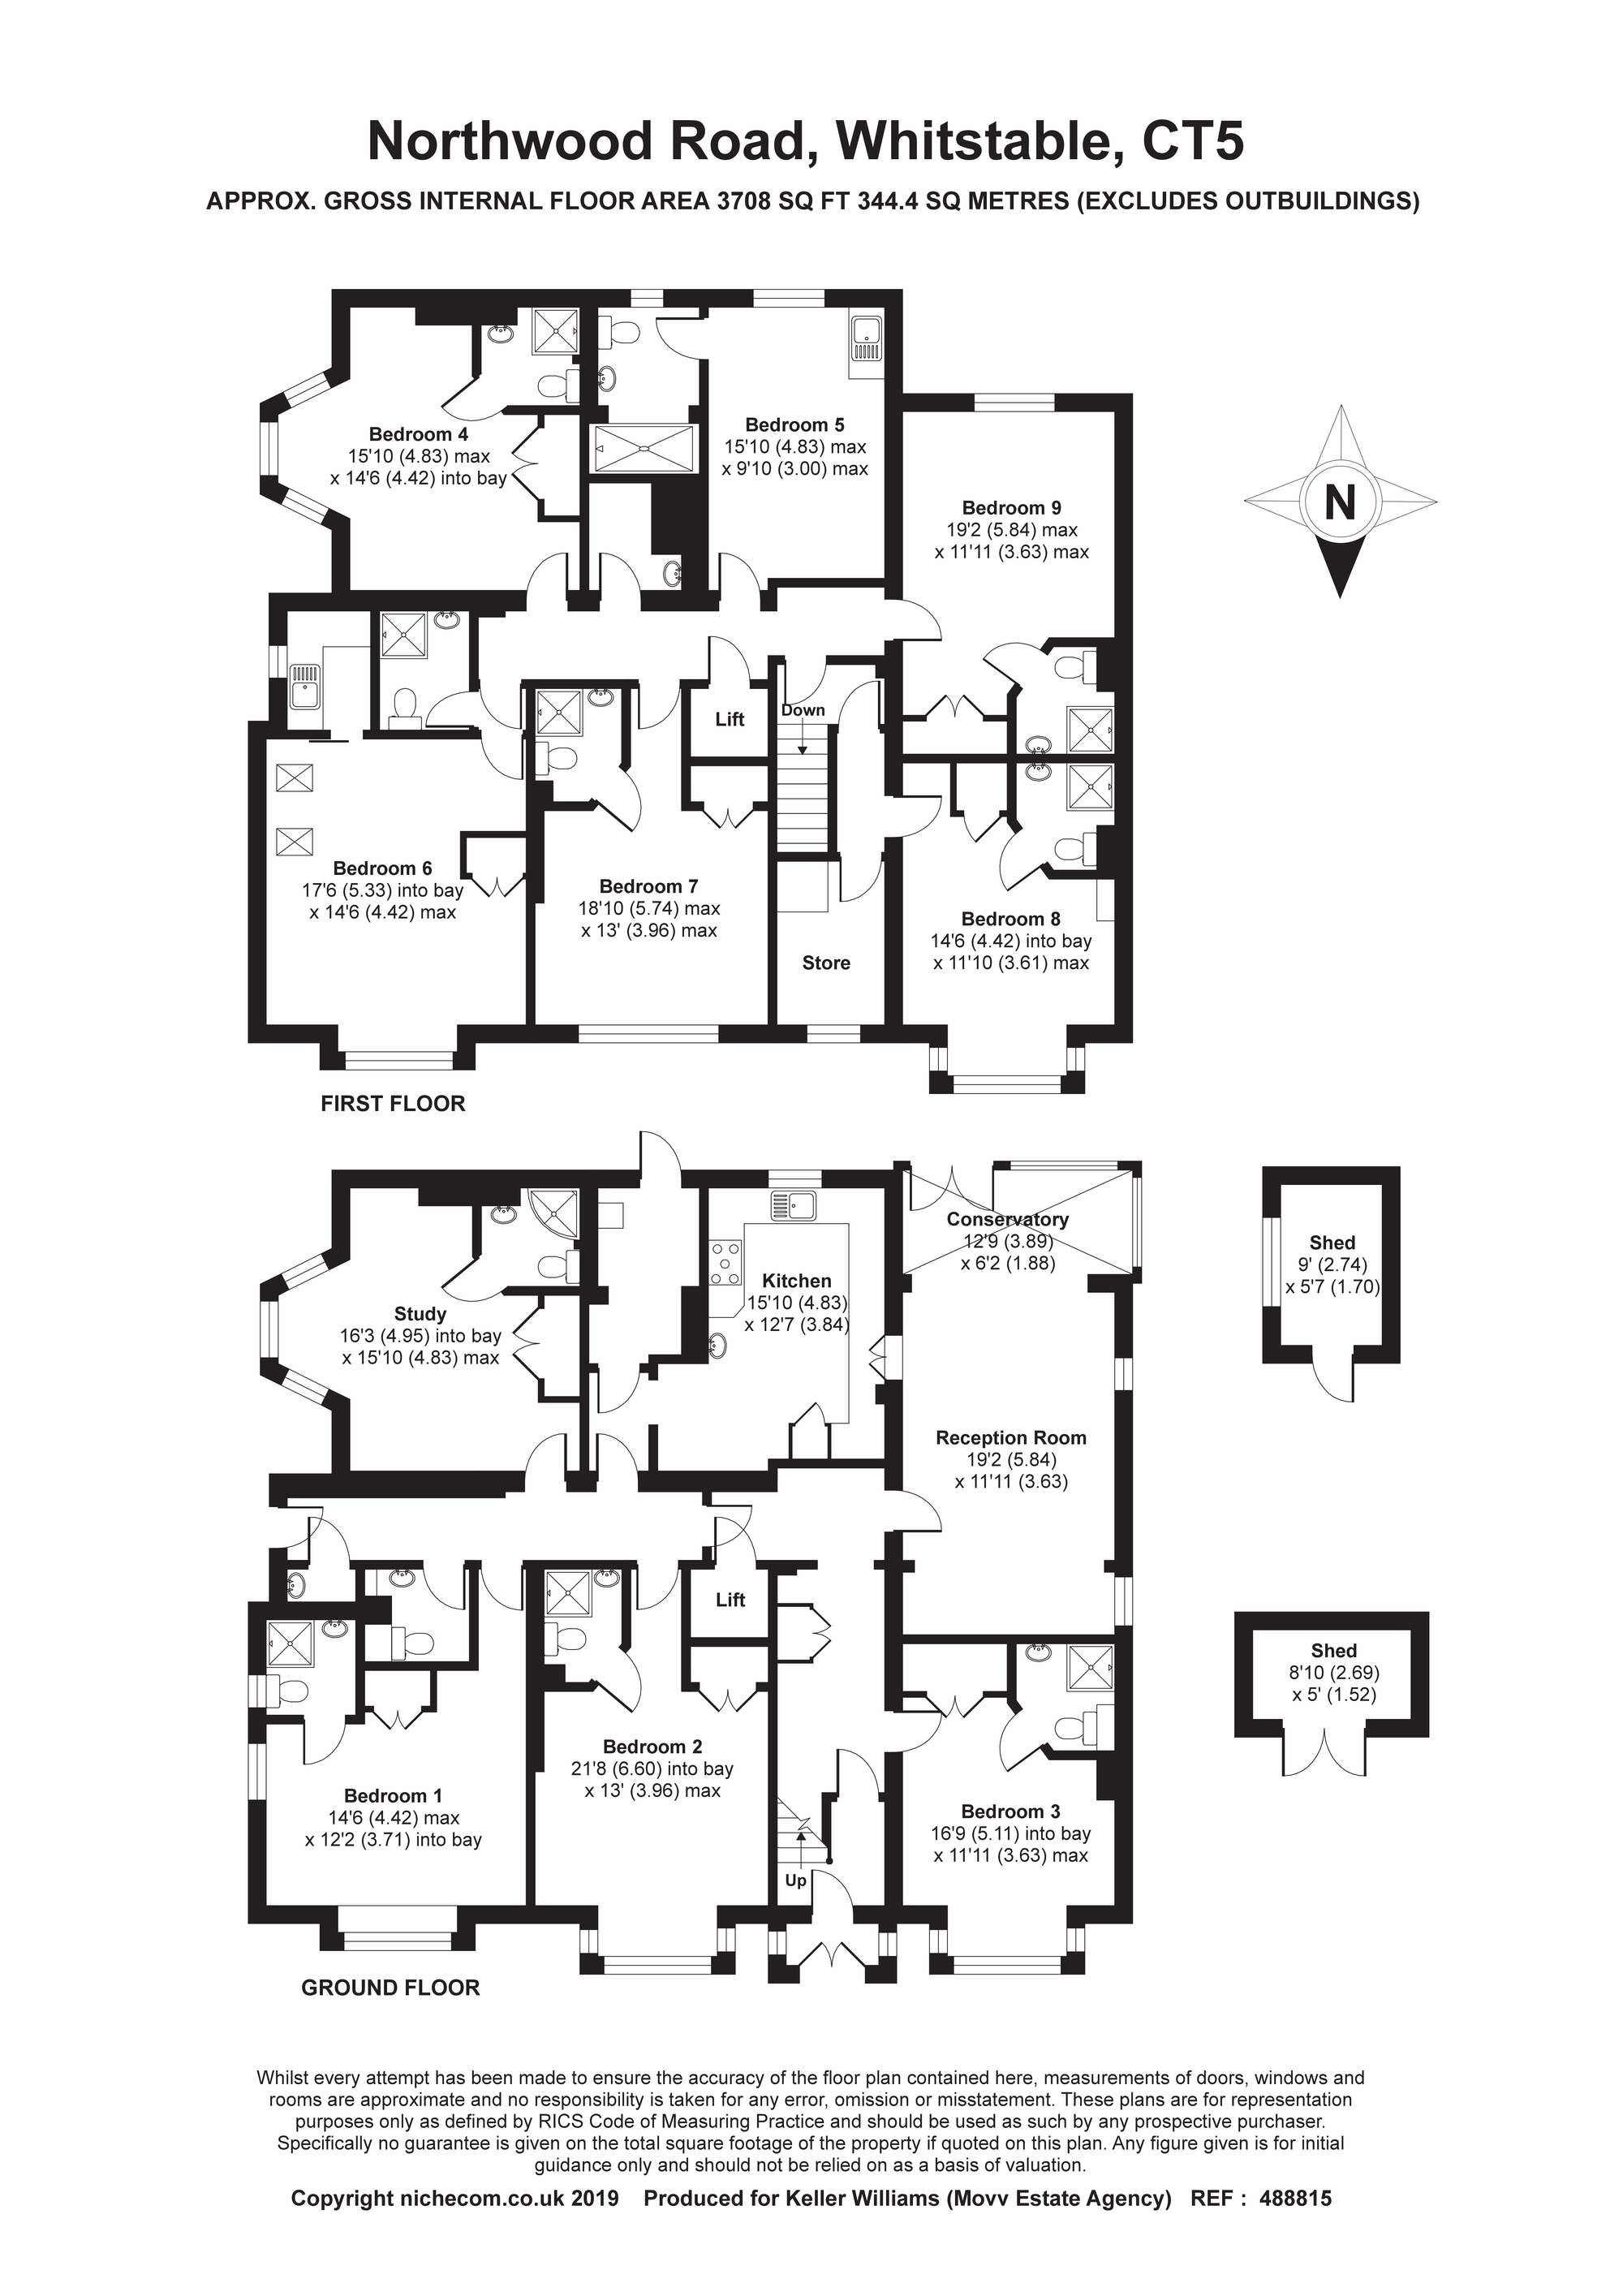 9 Bedrooms Land for sale in Northwood Road, Whitstable CT5